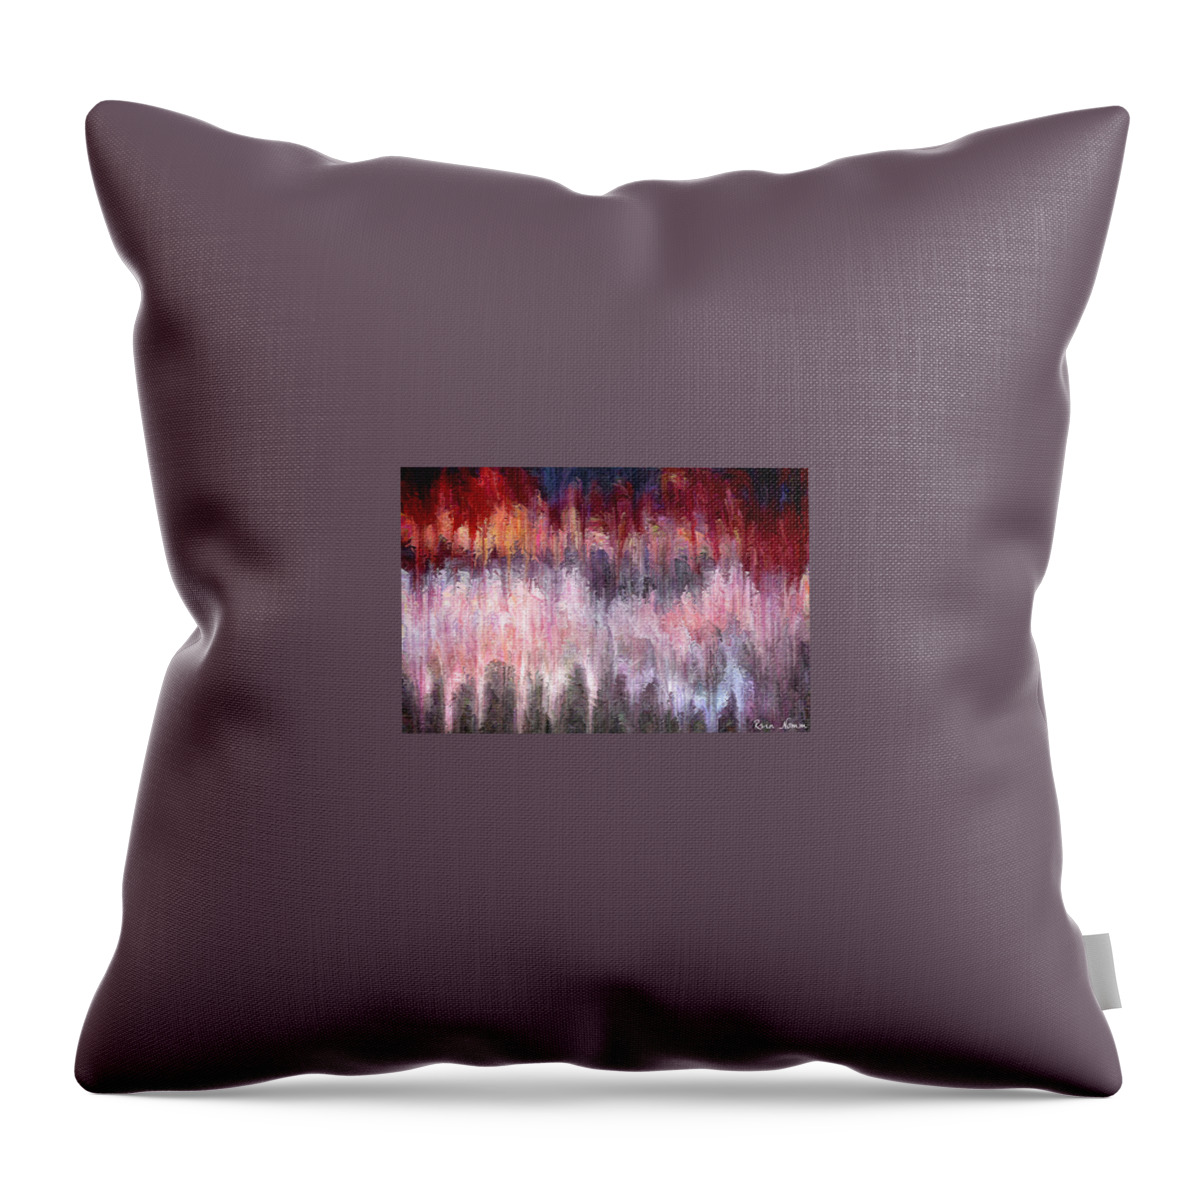  Throw Pillow featuring the mixed media Our Veil of Tears by Rein Nomm